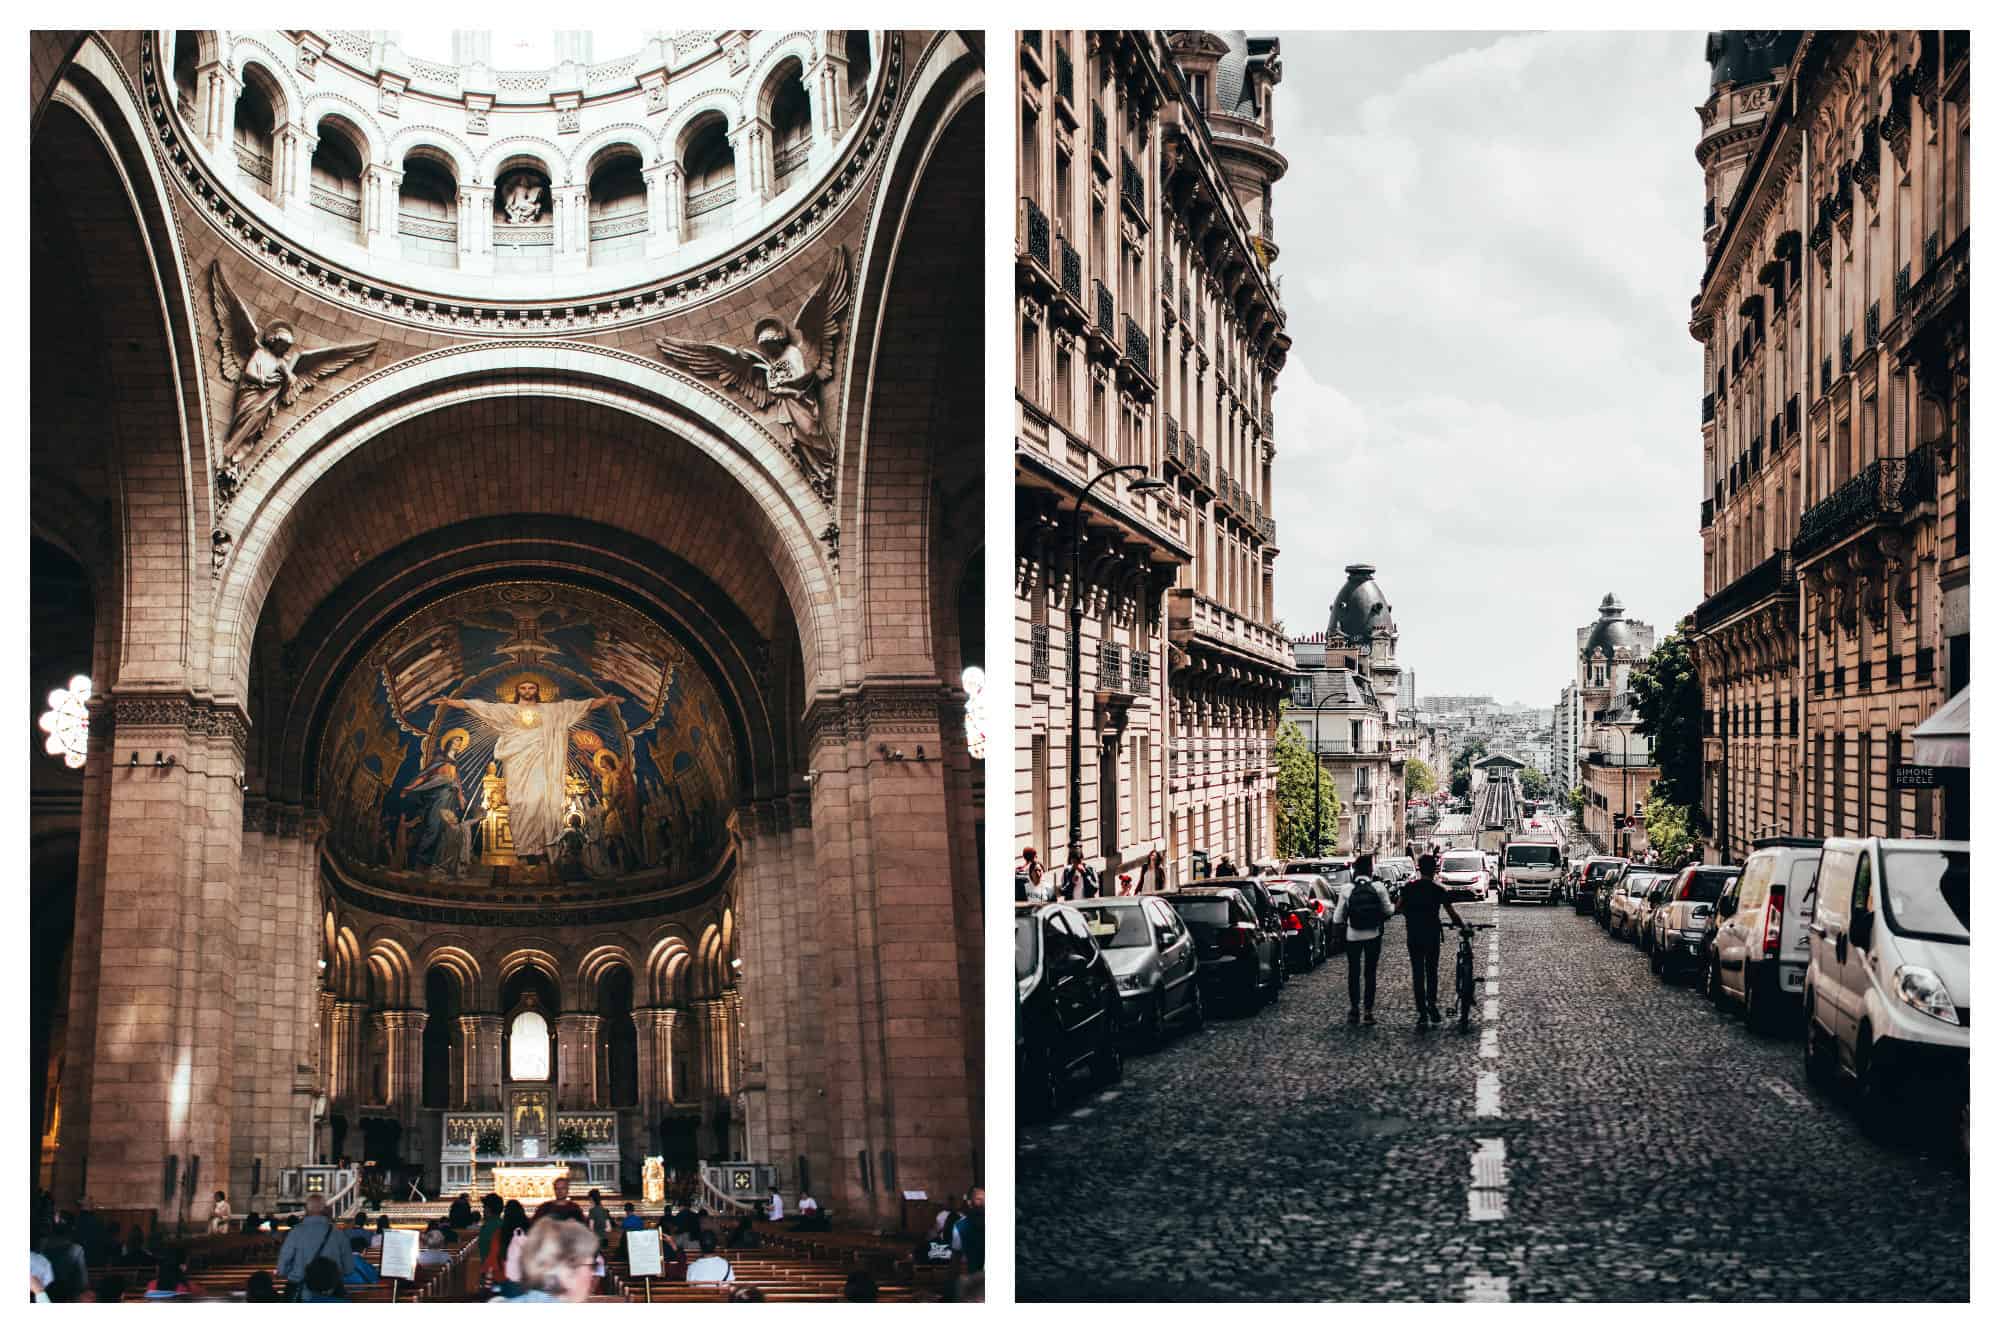 Inside a Paris church with a fresco of Jesus painted on the entire back wall (left). Cobblestone streets of Paris and two people walking along (right).